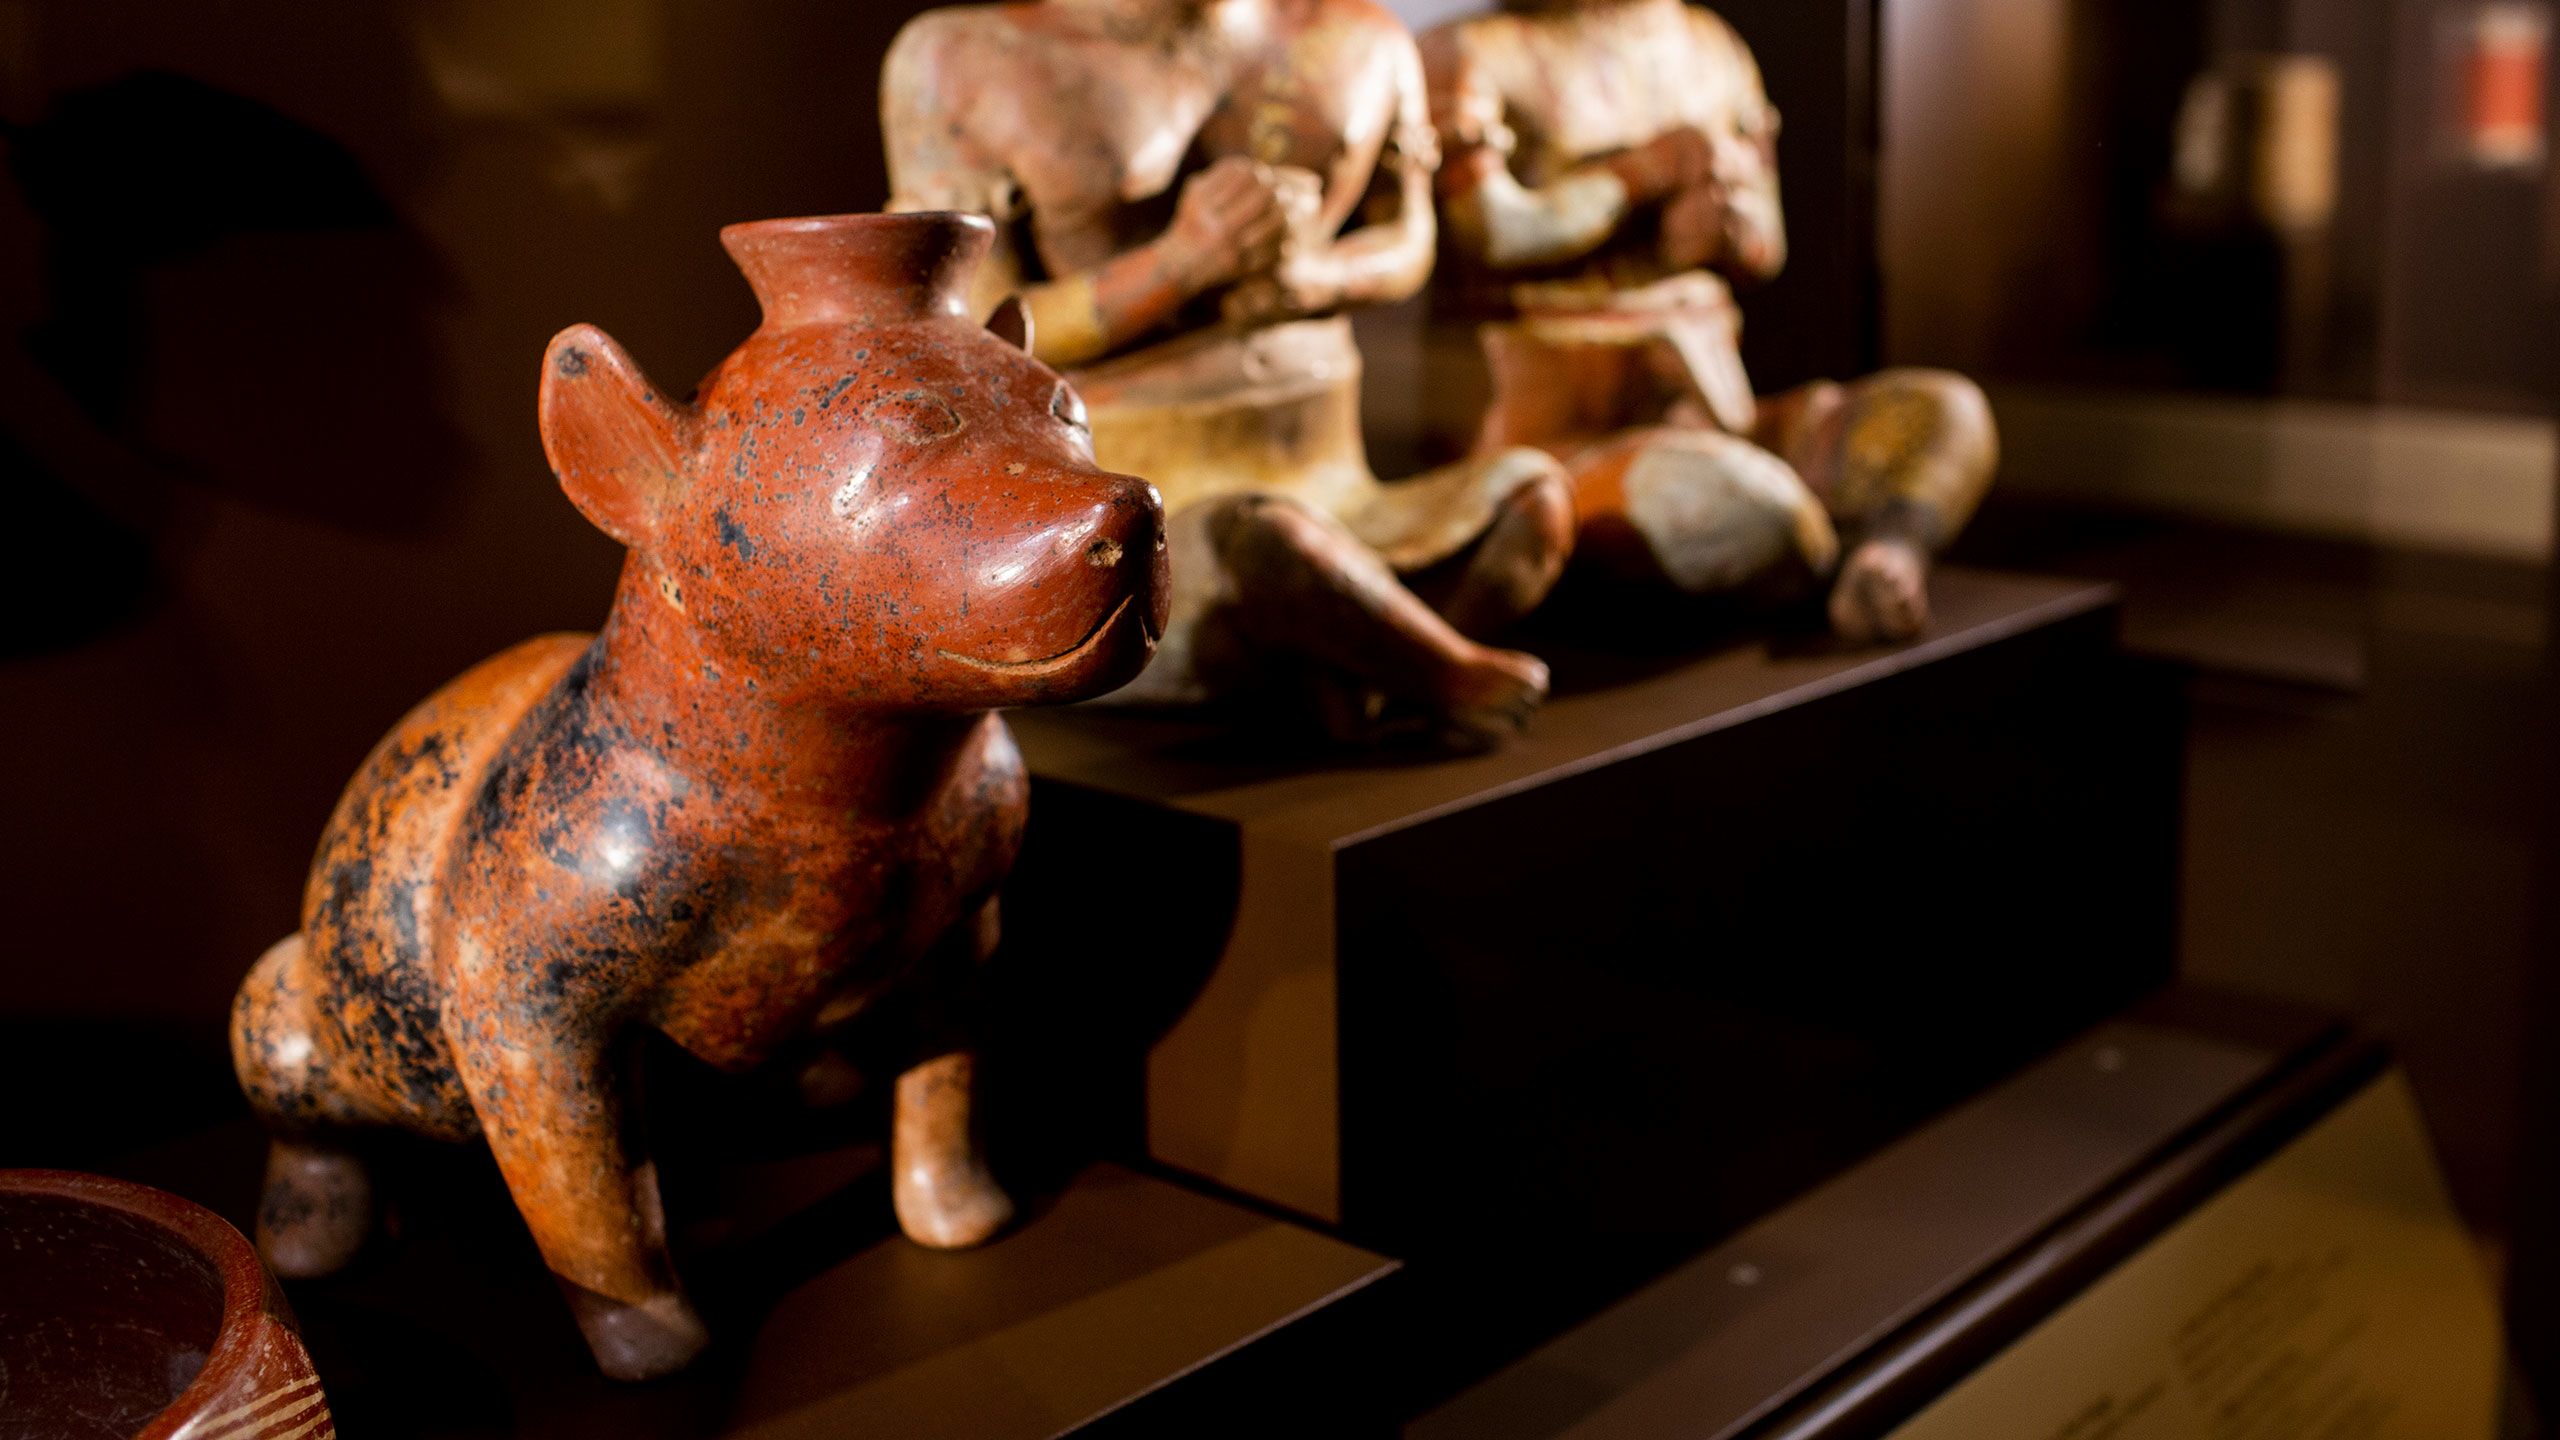 A small ceramic orange-brown dog figurine with a mottled surface sits in a display case with two ceramic figurines showing people sitting with legs crossed and arms folded. 